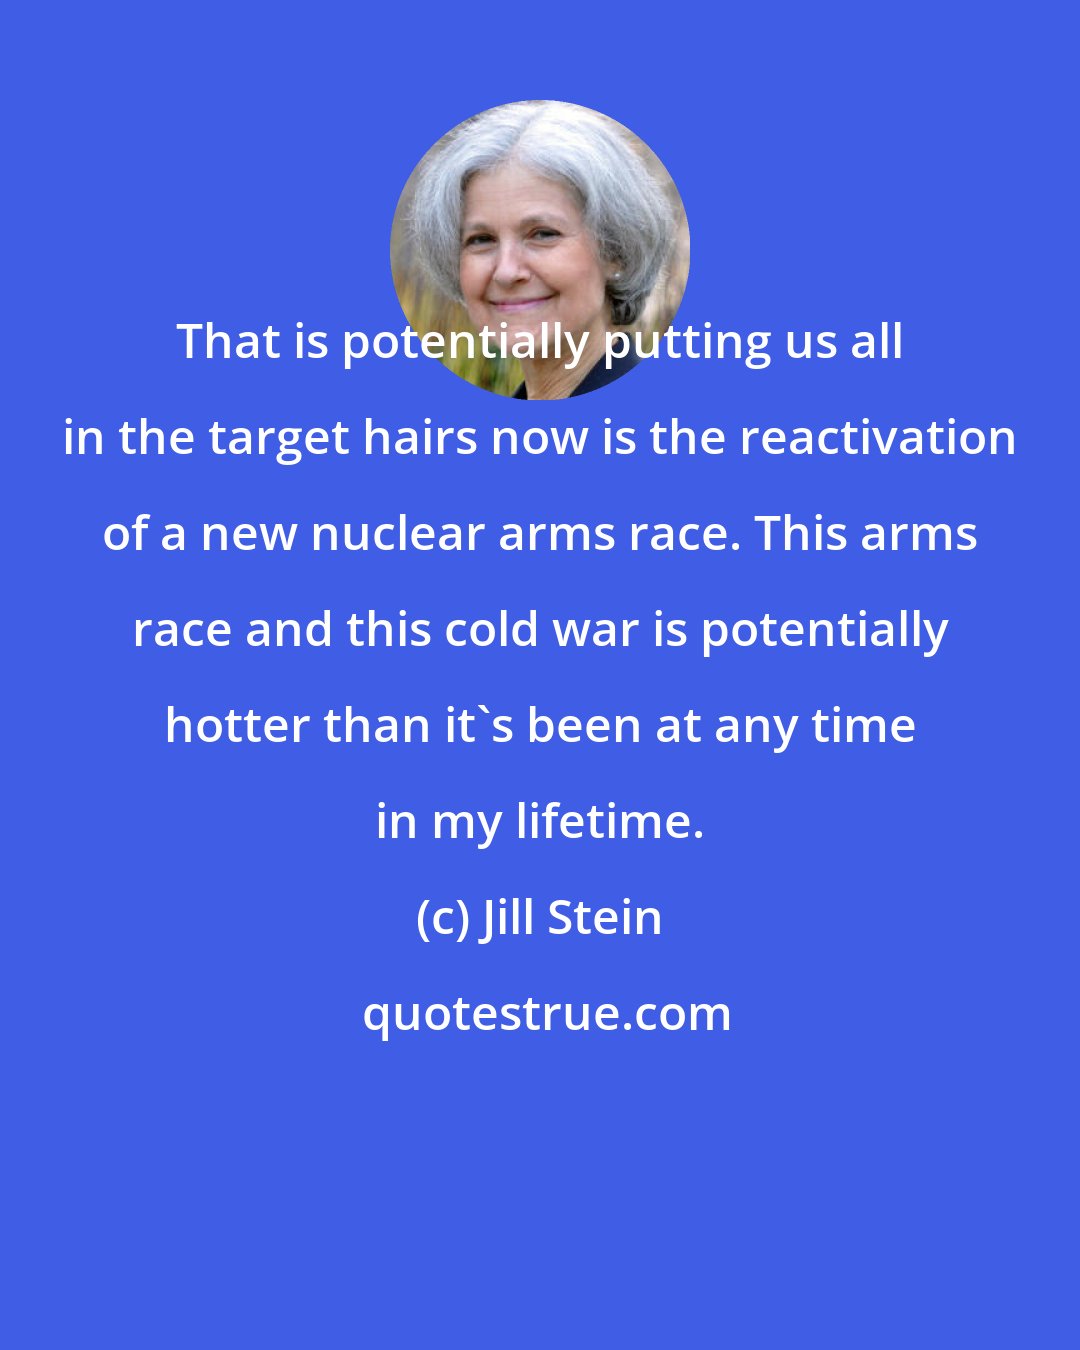 Jill Stein: That is potentially putting us all in the target hairs now is the reactivation of a new nuclear arms race. This arms race and this cold war is potentially hotter than it's been at any time in my lifetime.